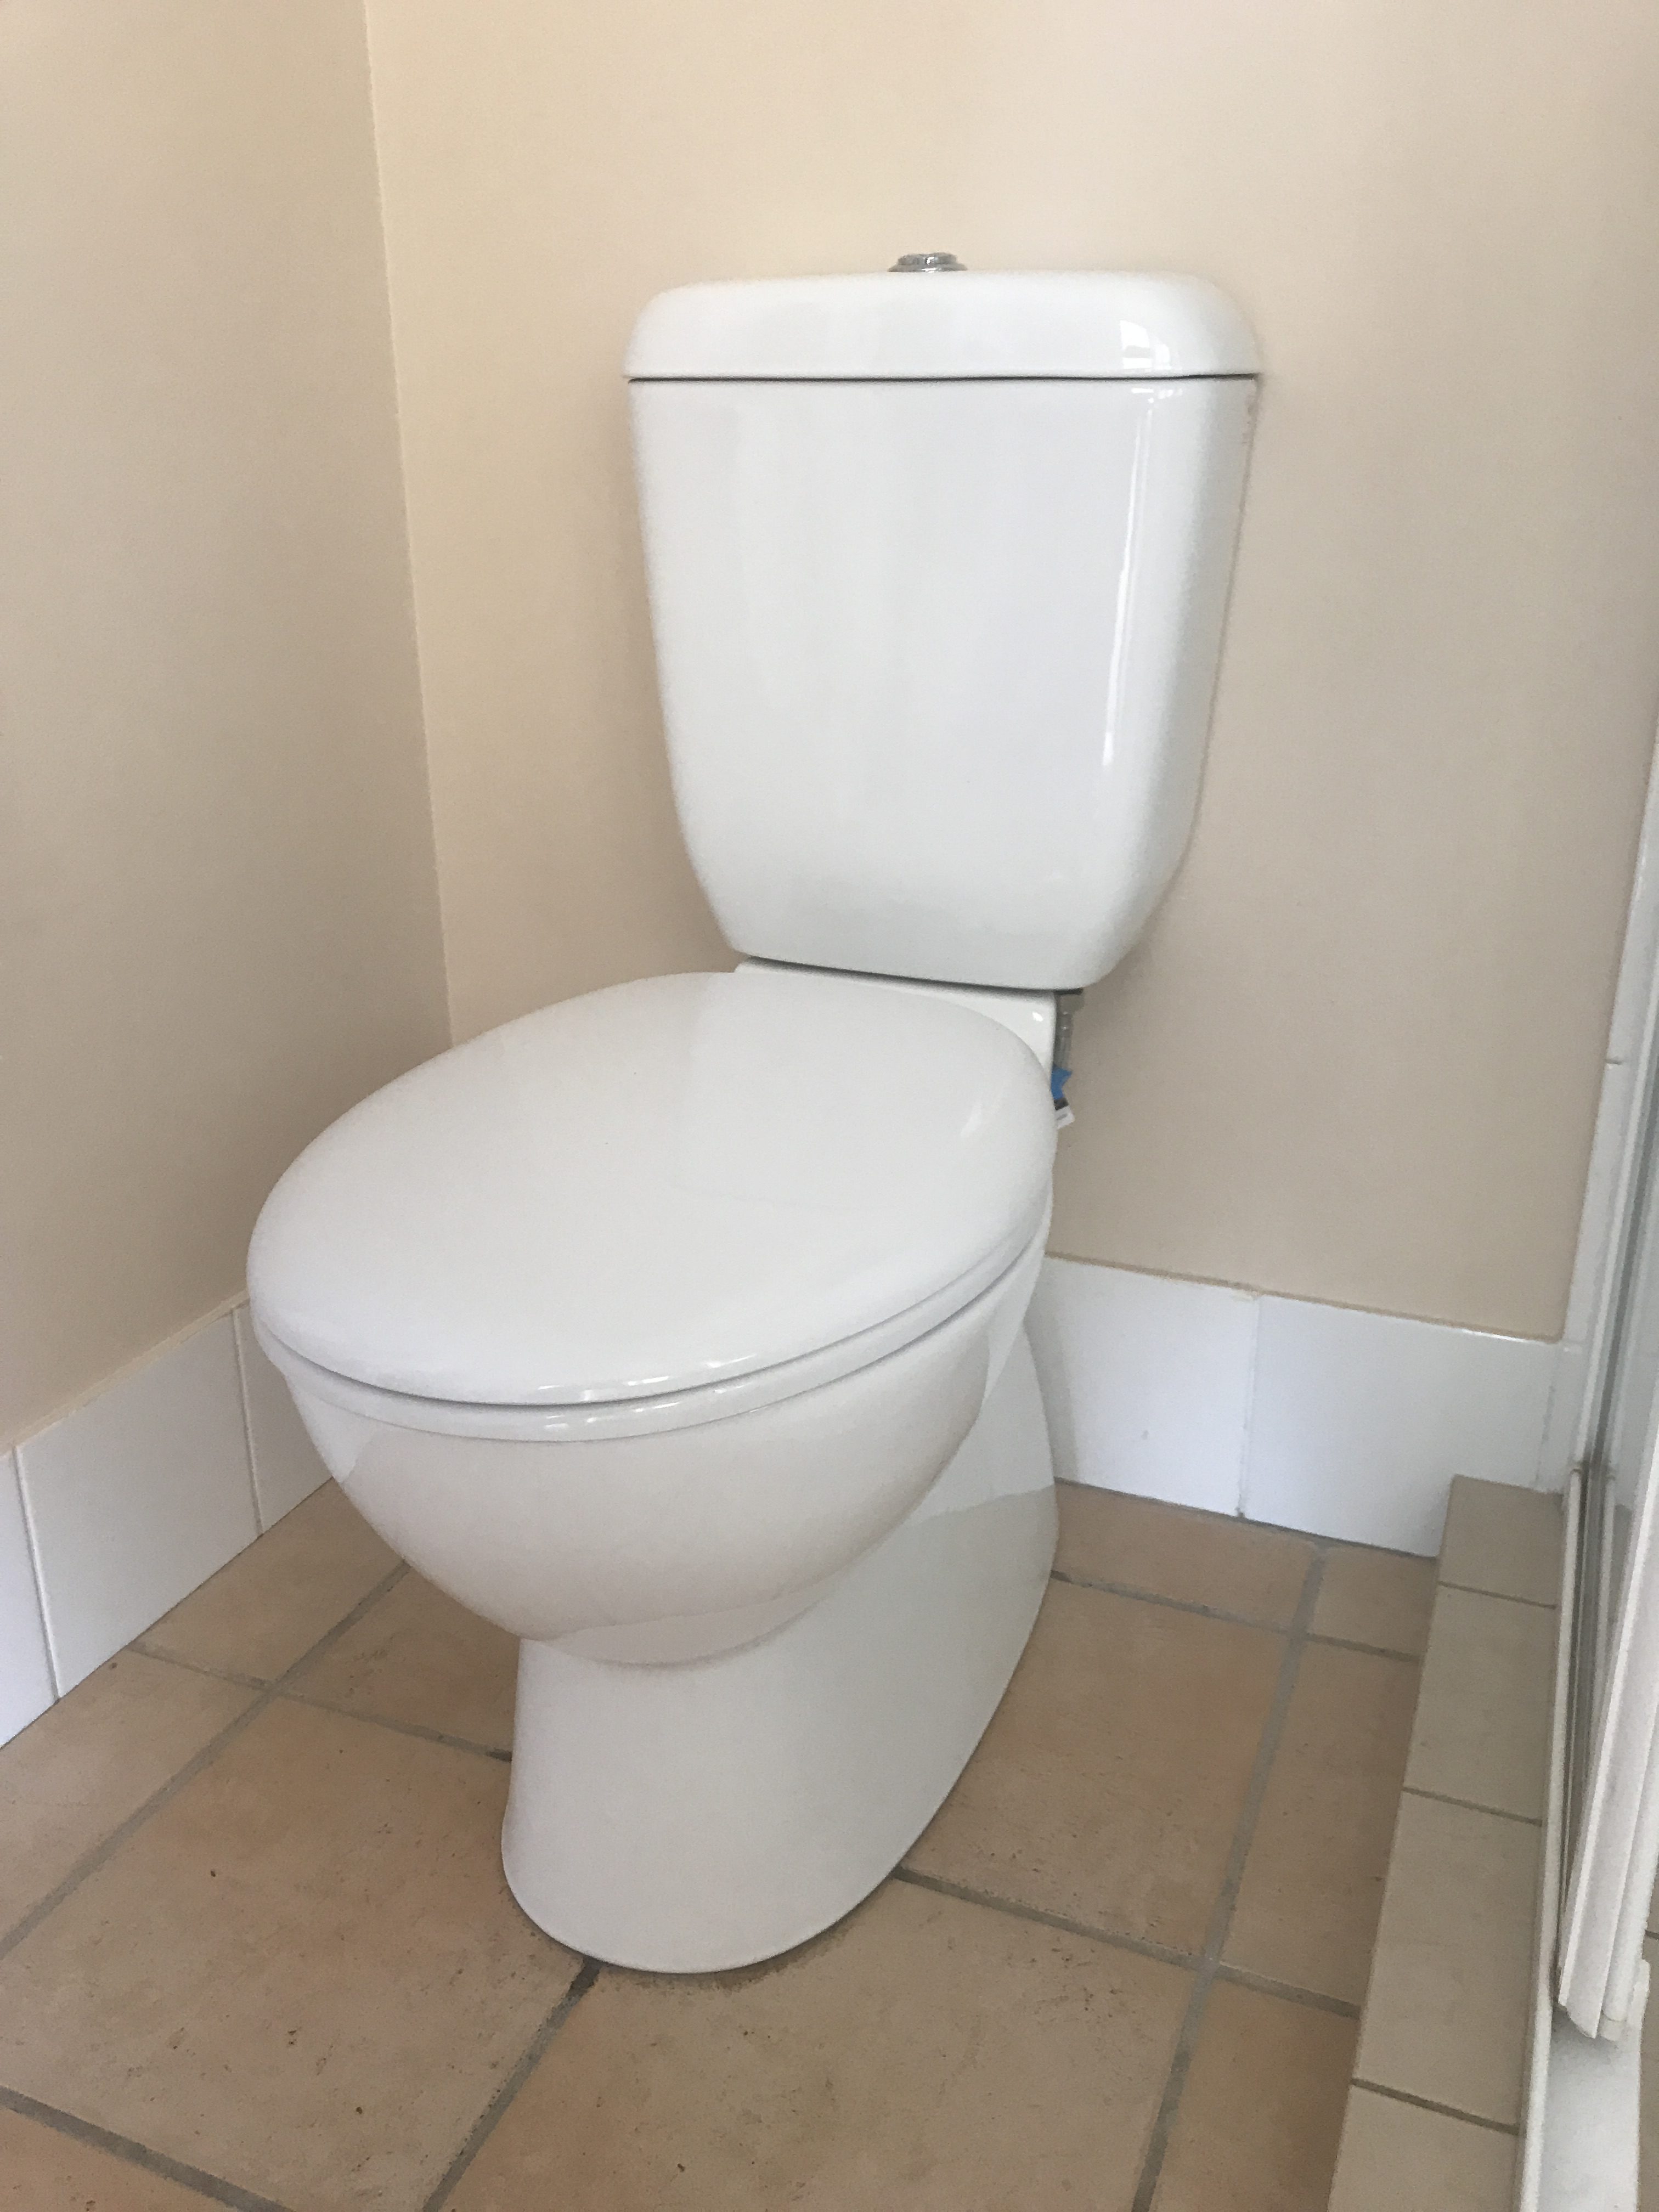 Toilet replacement- Plumber, Drainer, Gas fitter